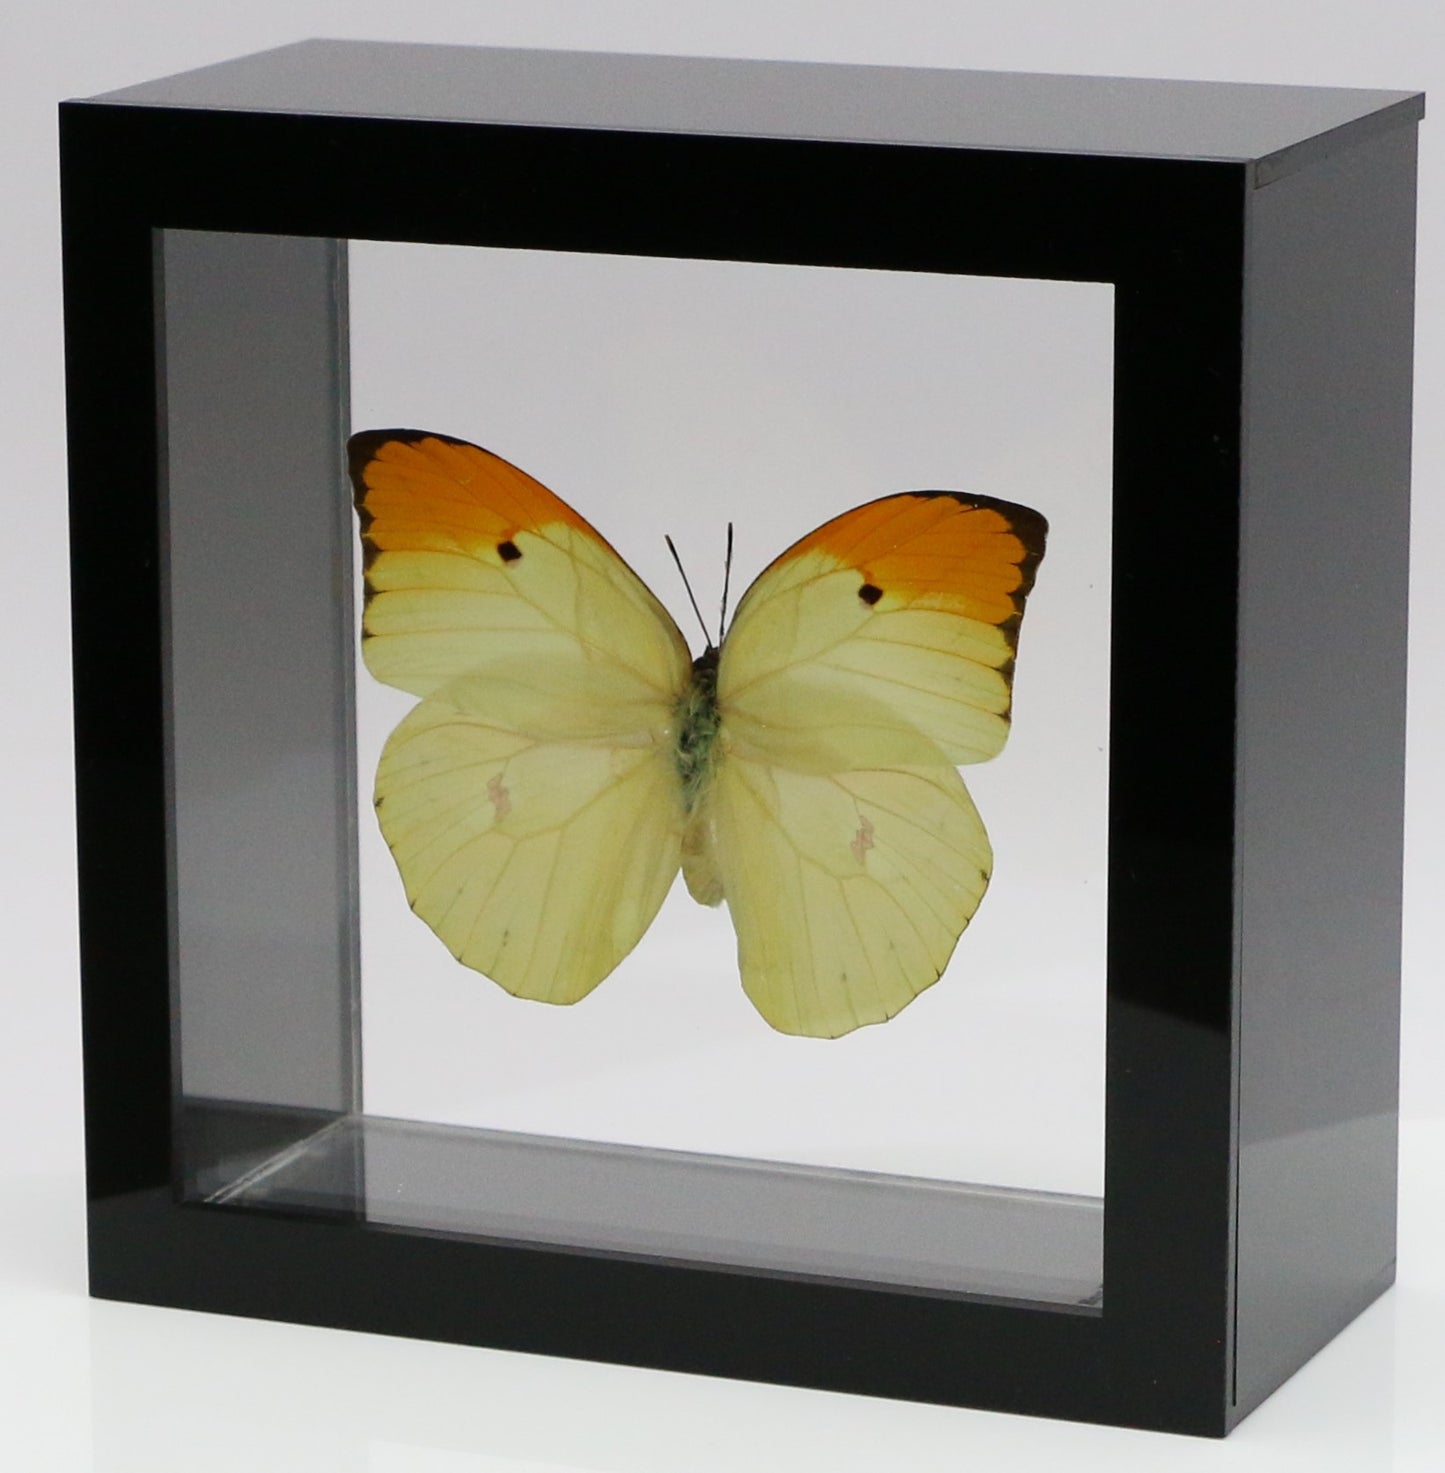 9050504 - Real Butterfly Acrylic Display Box - 5"X5" - Orange-Tipped Angled Sulphur (Anteos menippe)